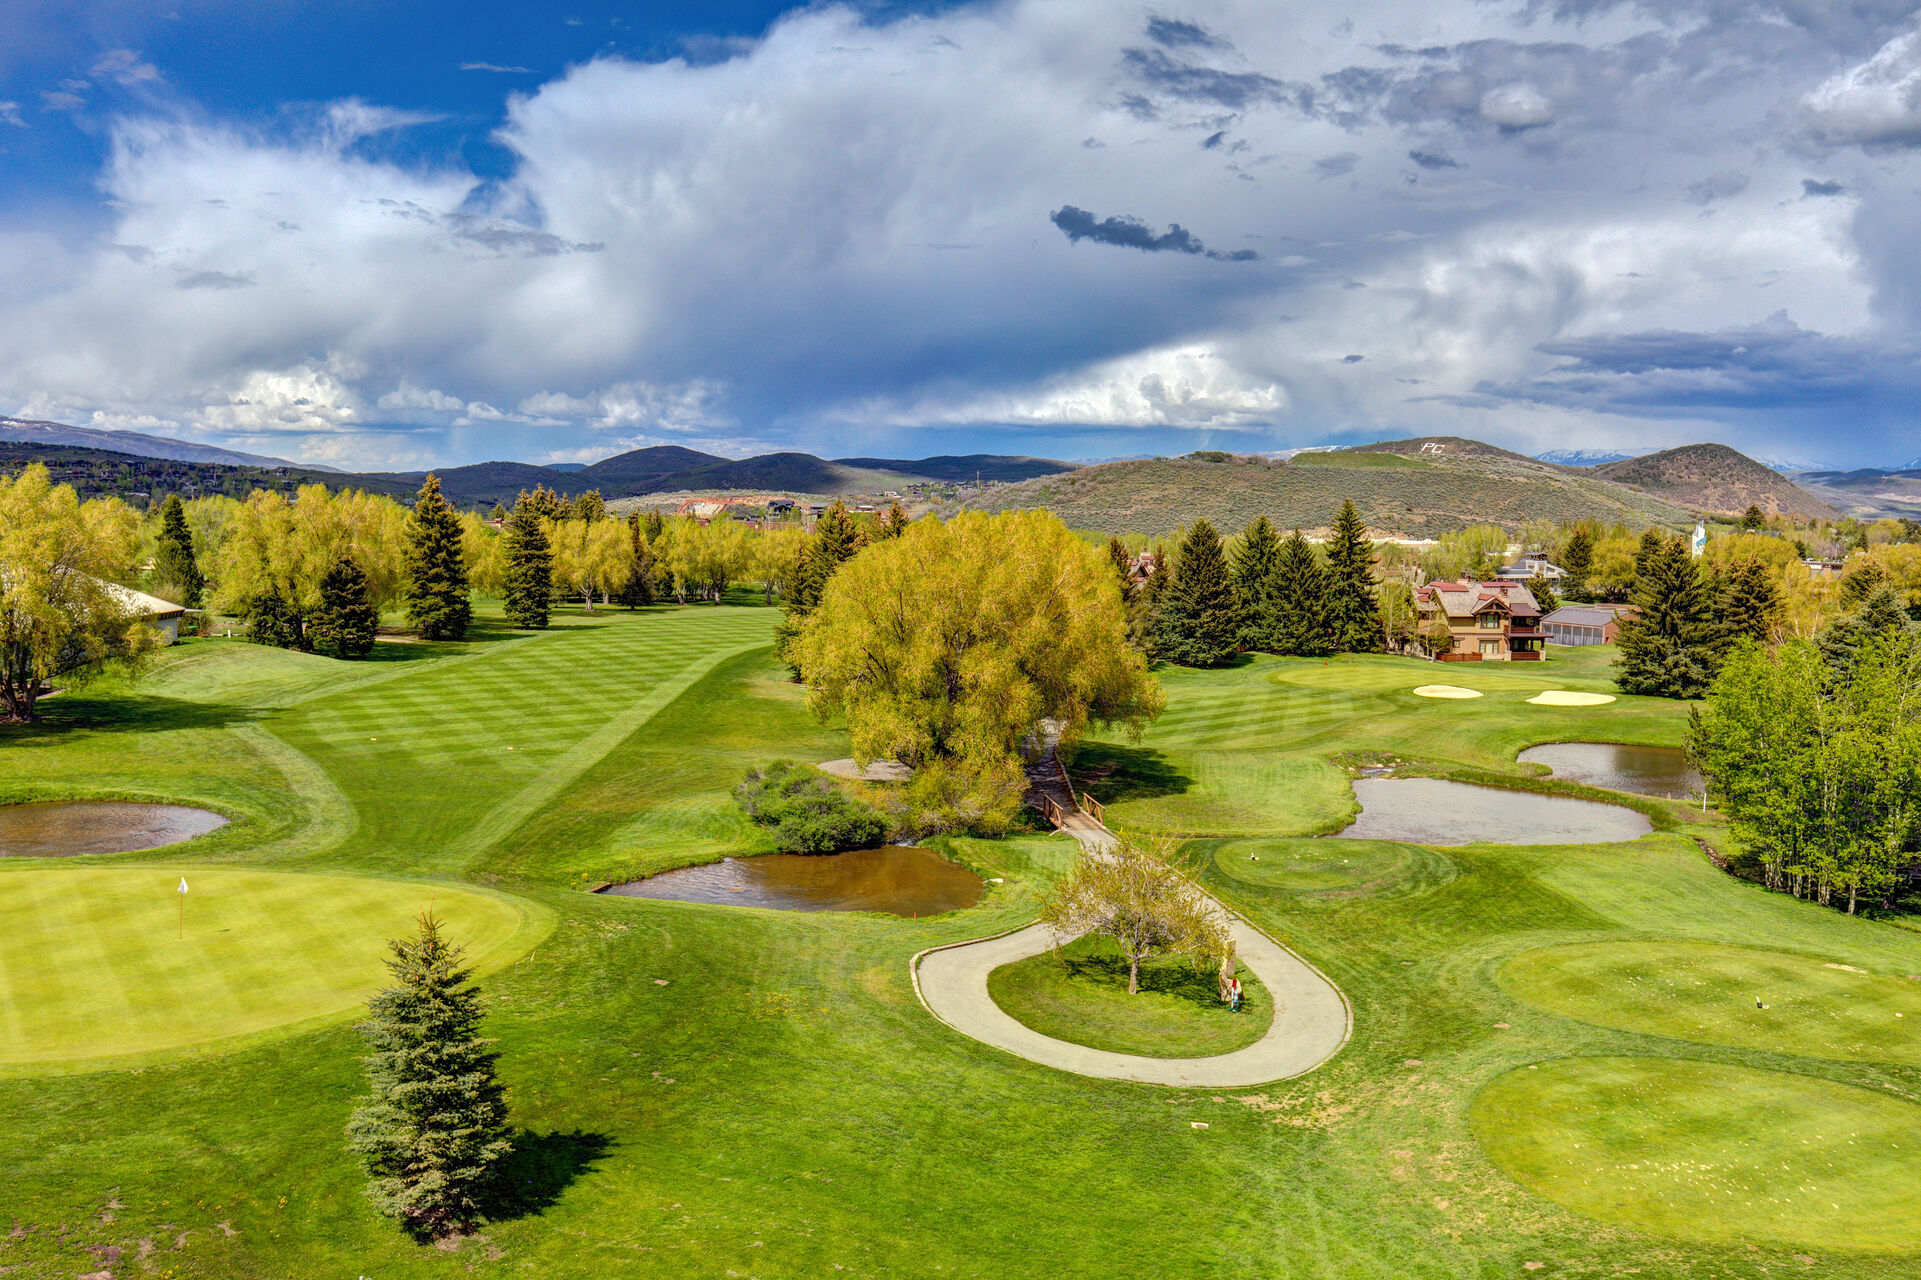 Park City Golf Course, within walking distance